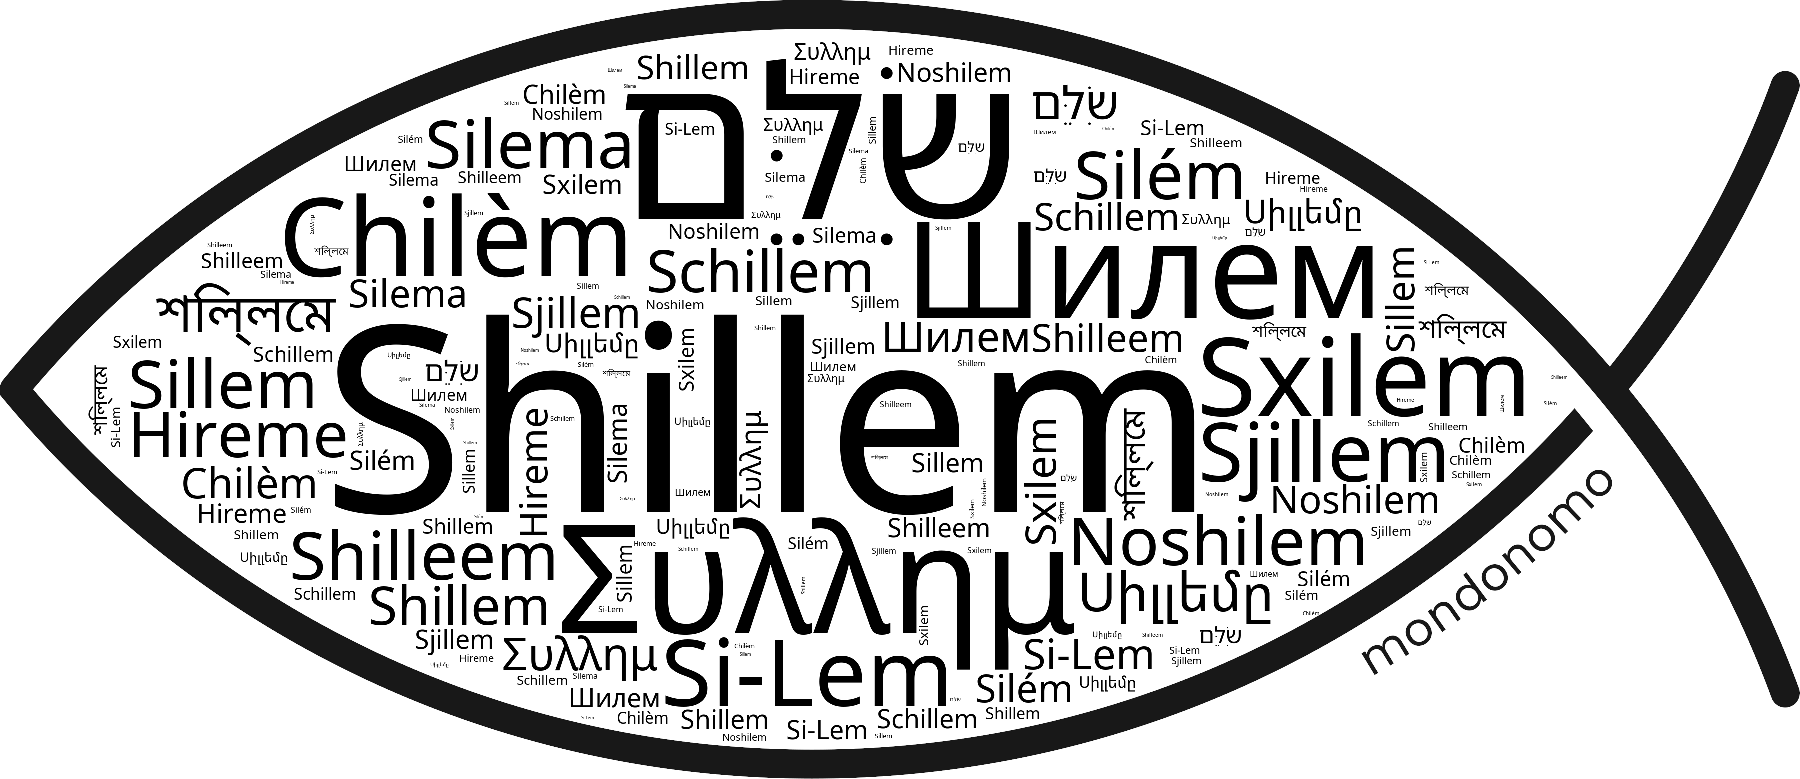 Name Shillem in the world's Bibles